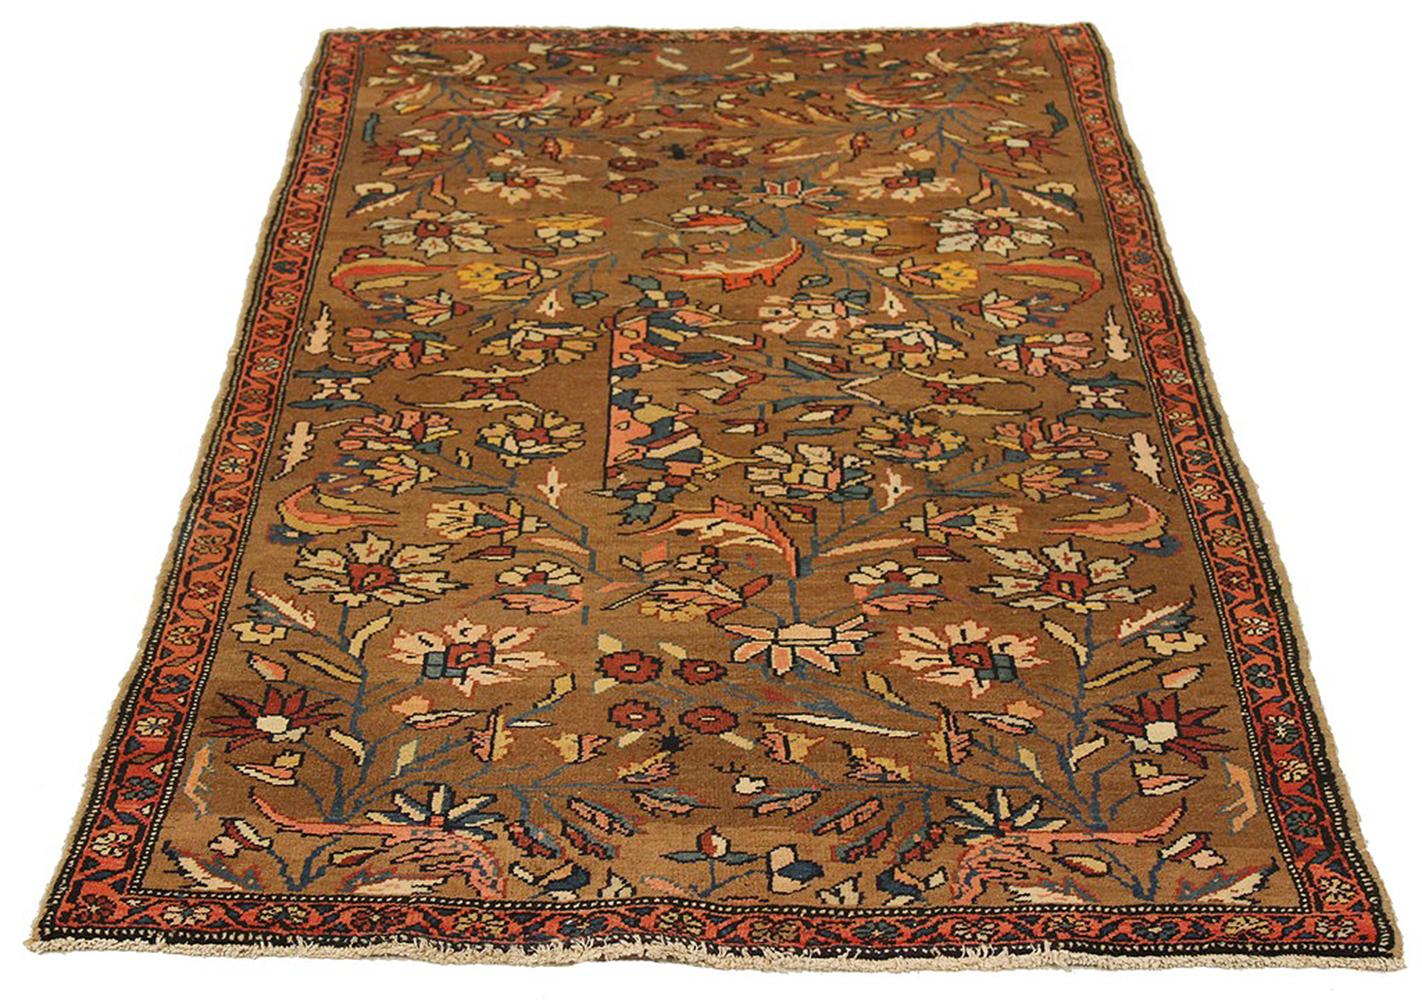 Antique Persian rug handwoven from the finest sheep’s wool and colored with all-natural vegetable dyes that are safe for humans and pets. It’s a traditional Hamedan design featuring floral patterns in pink and navy on a brown field. The details are